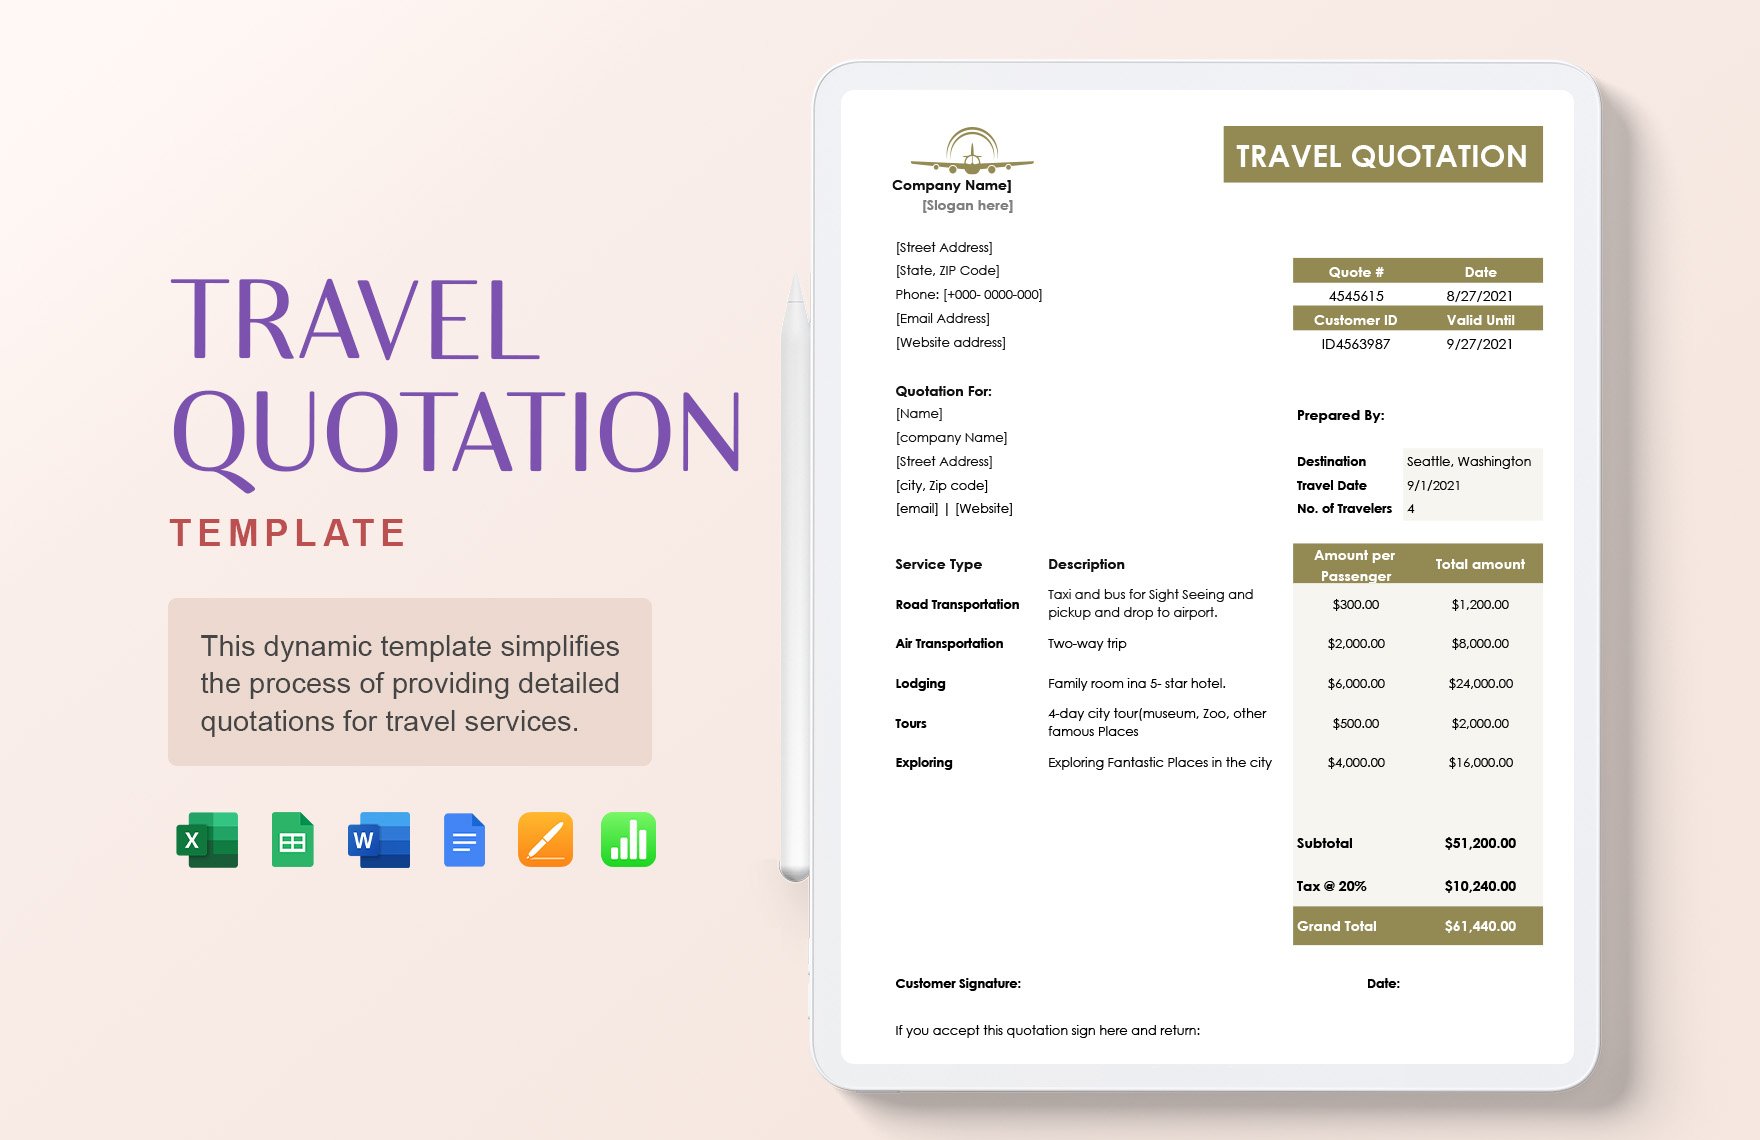 Free Travel Quotation Template